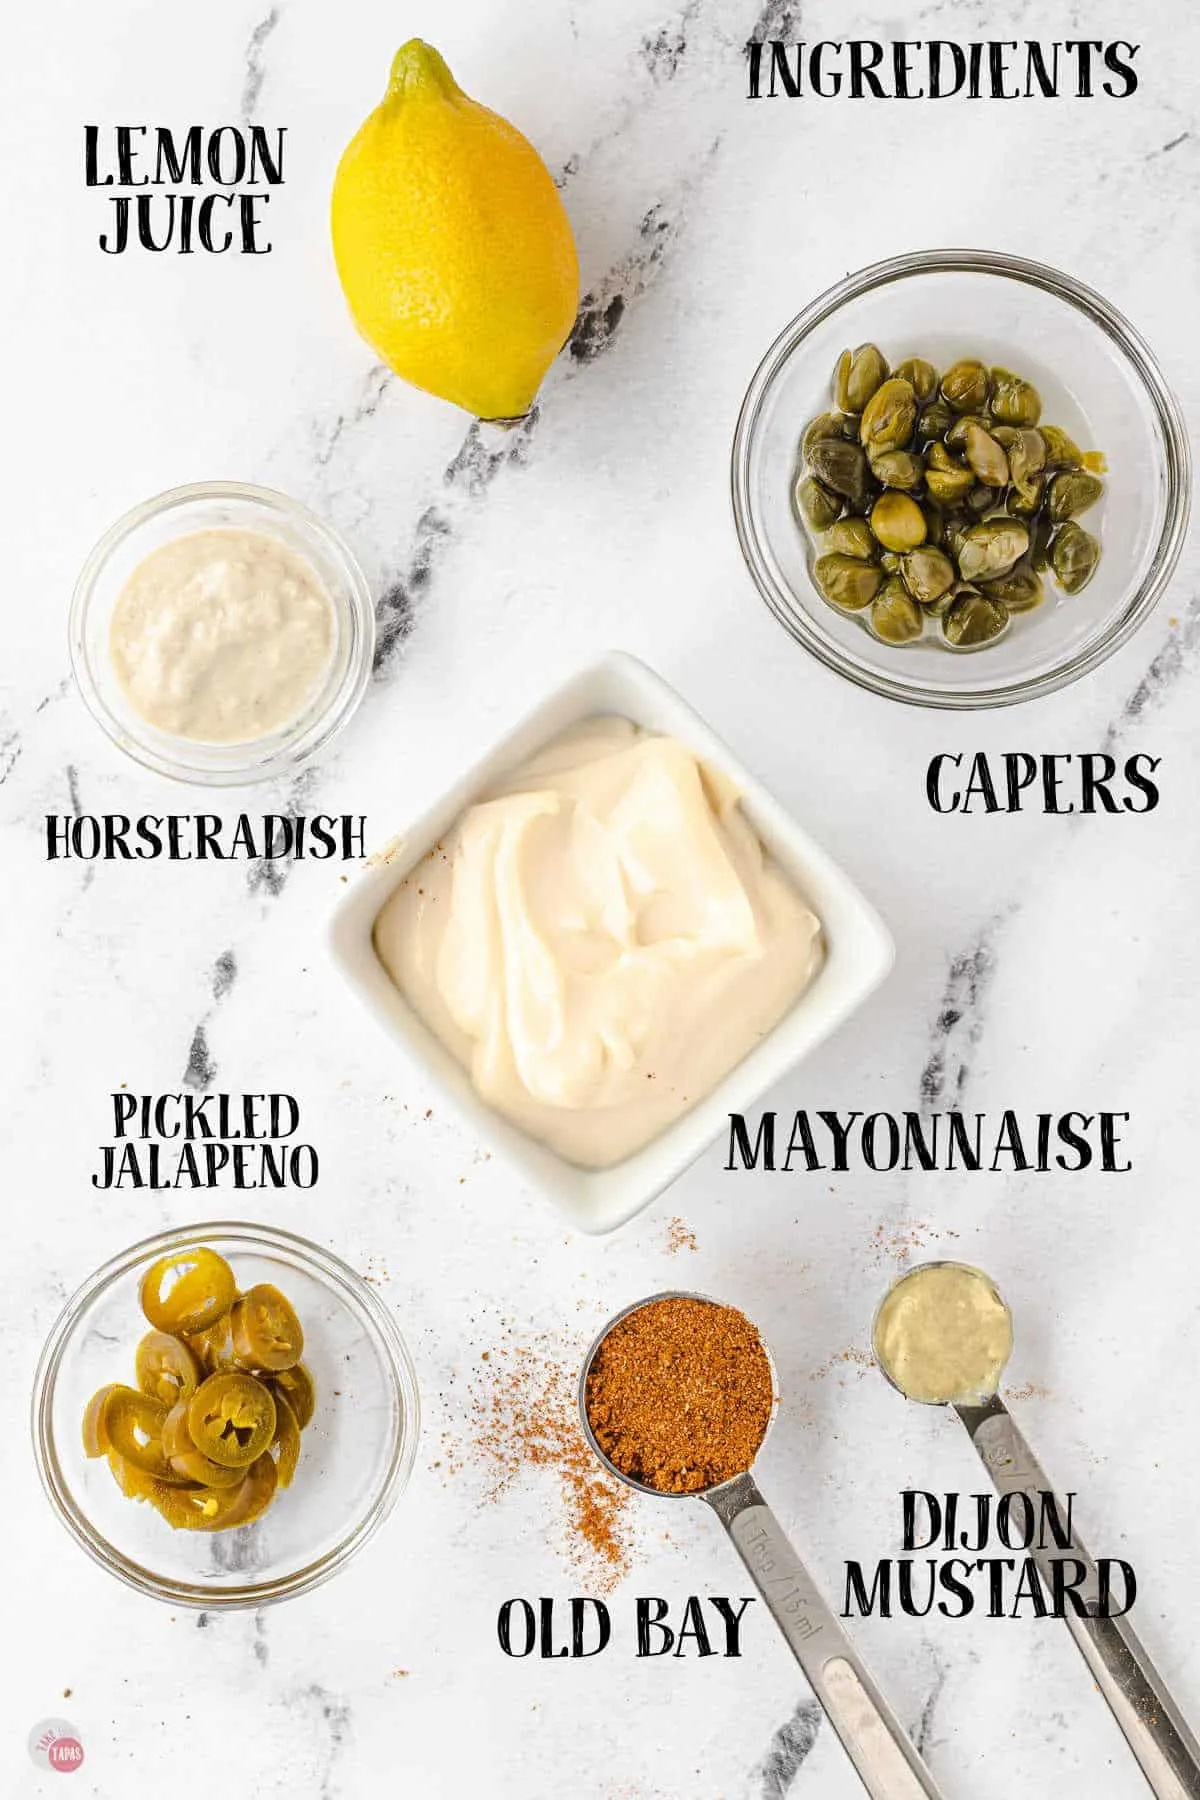 labeled picture of tartar sauce ingredients